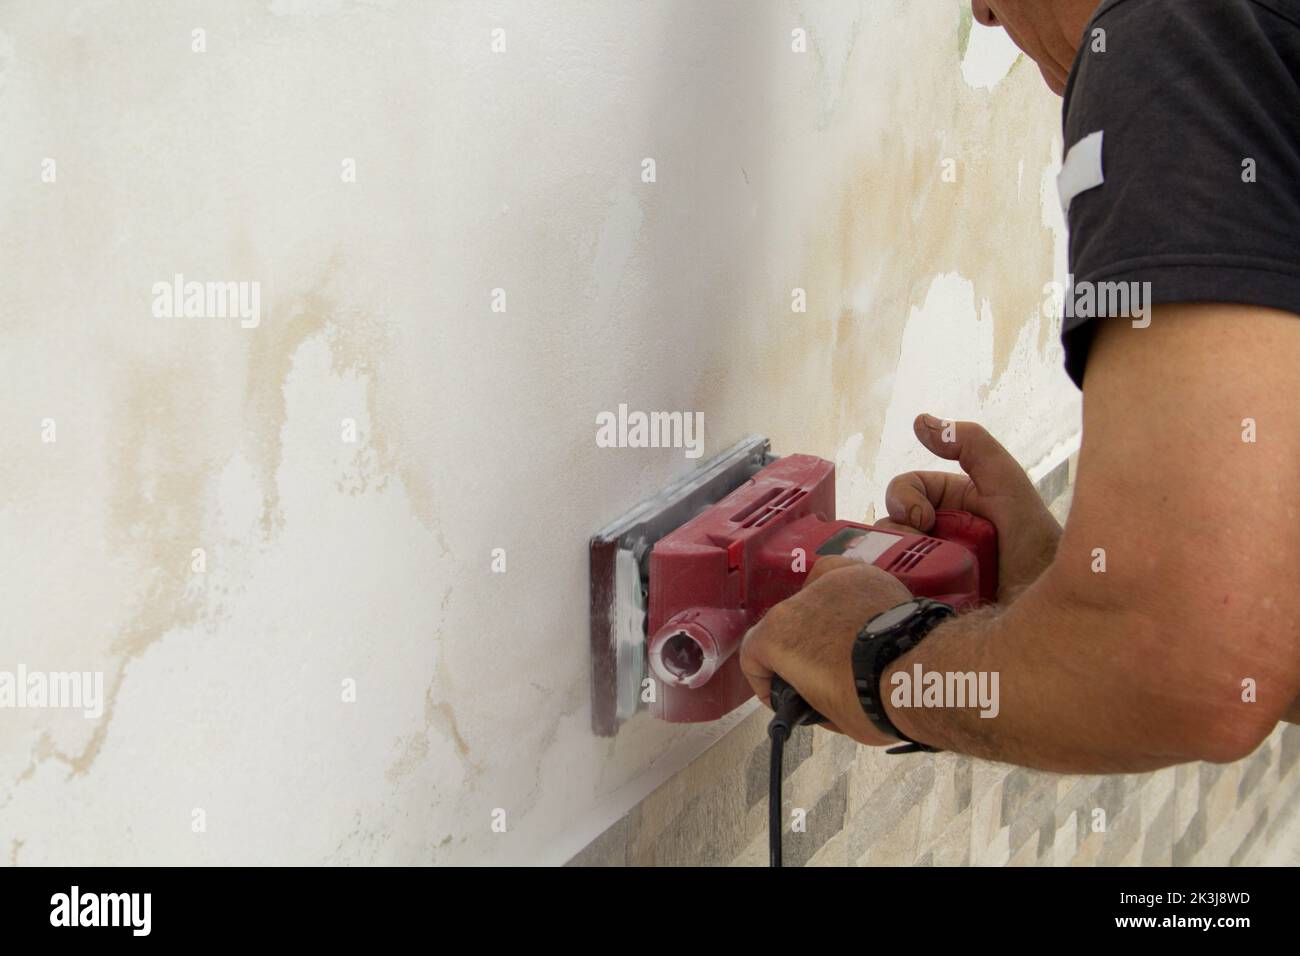 A handyman removing plaster and mold from a wall with a sanding machine Stock Photo